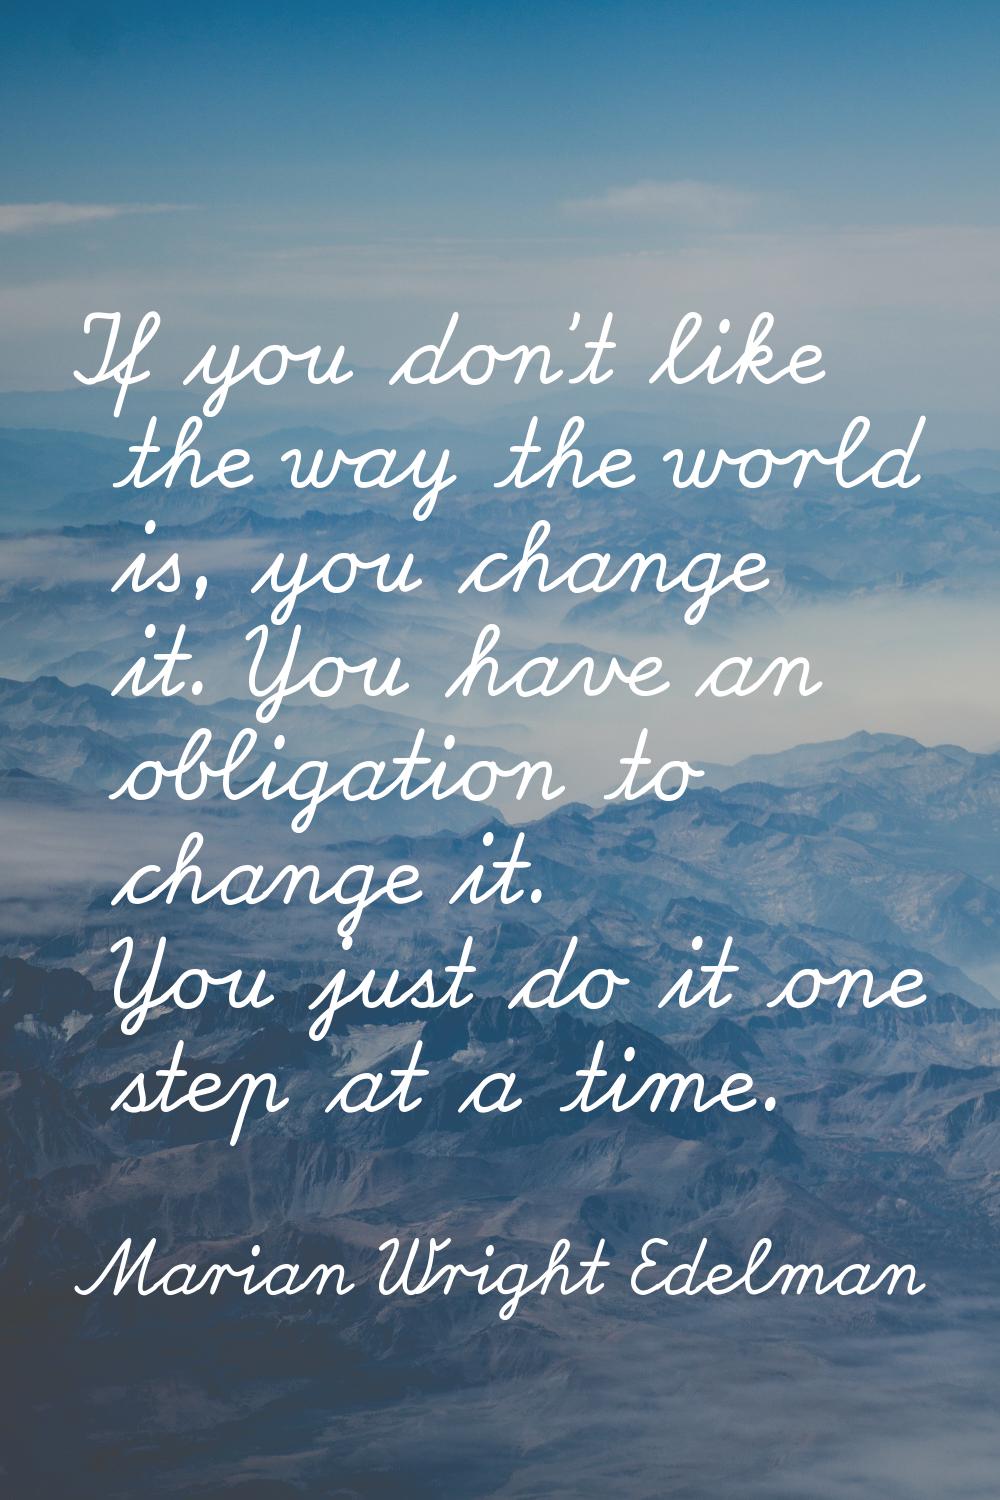 If you don't like the way the world is, you change it. You have an obligation to change it. You jus